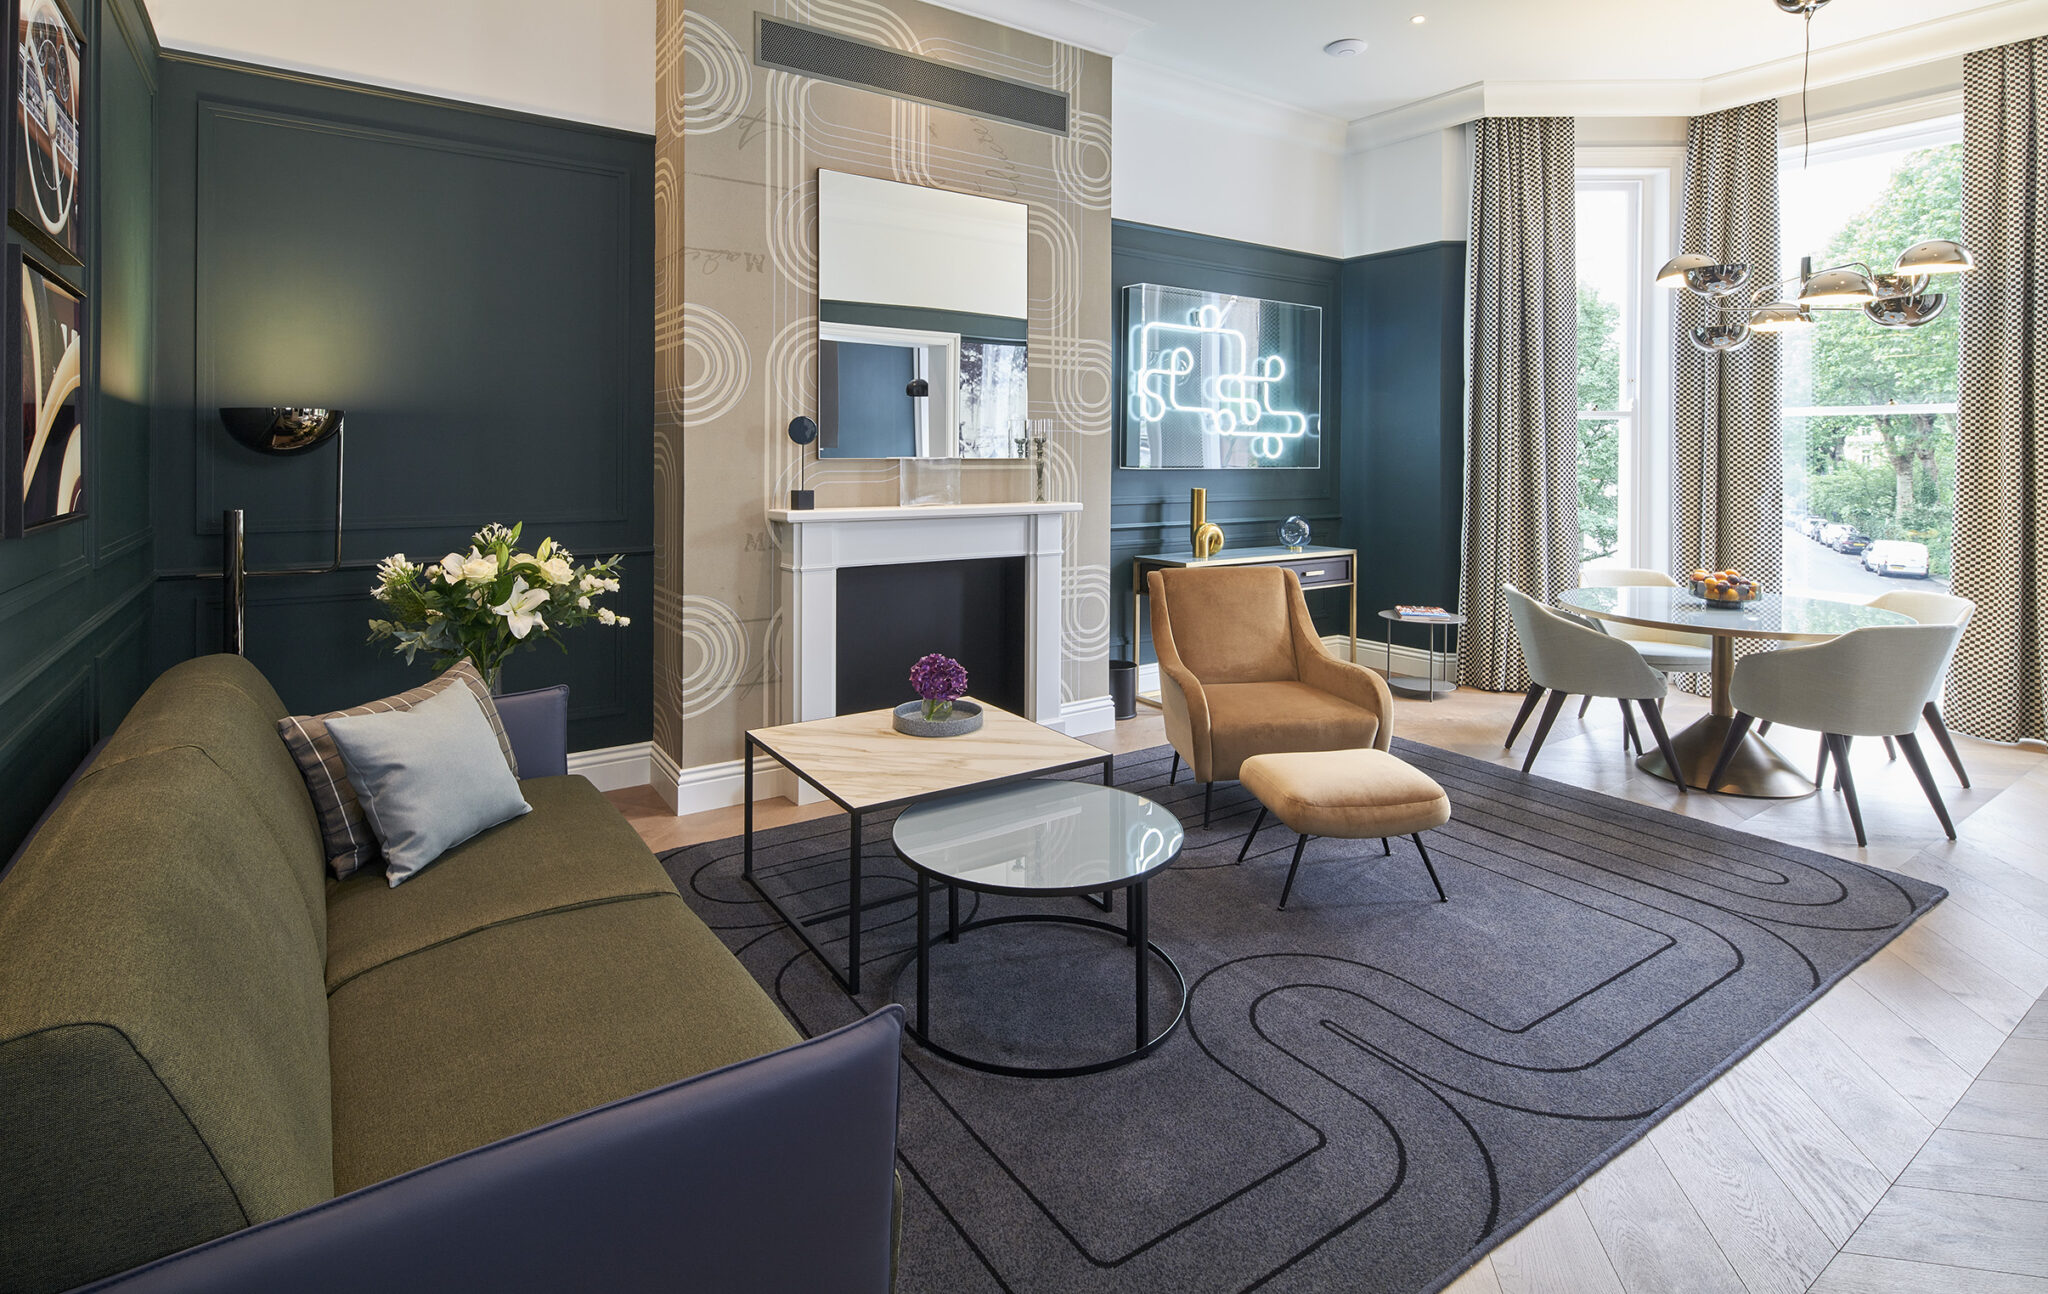 Looking-for-Luxury-Accommodation-Kensington?-Our-Lexham-Gardens-Luxury-Serviced-Apartments-in-Central-London-are-available-now-for-short-lets!-urban-Stay